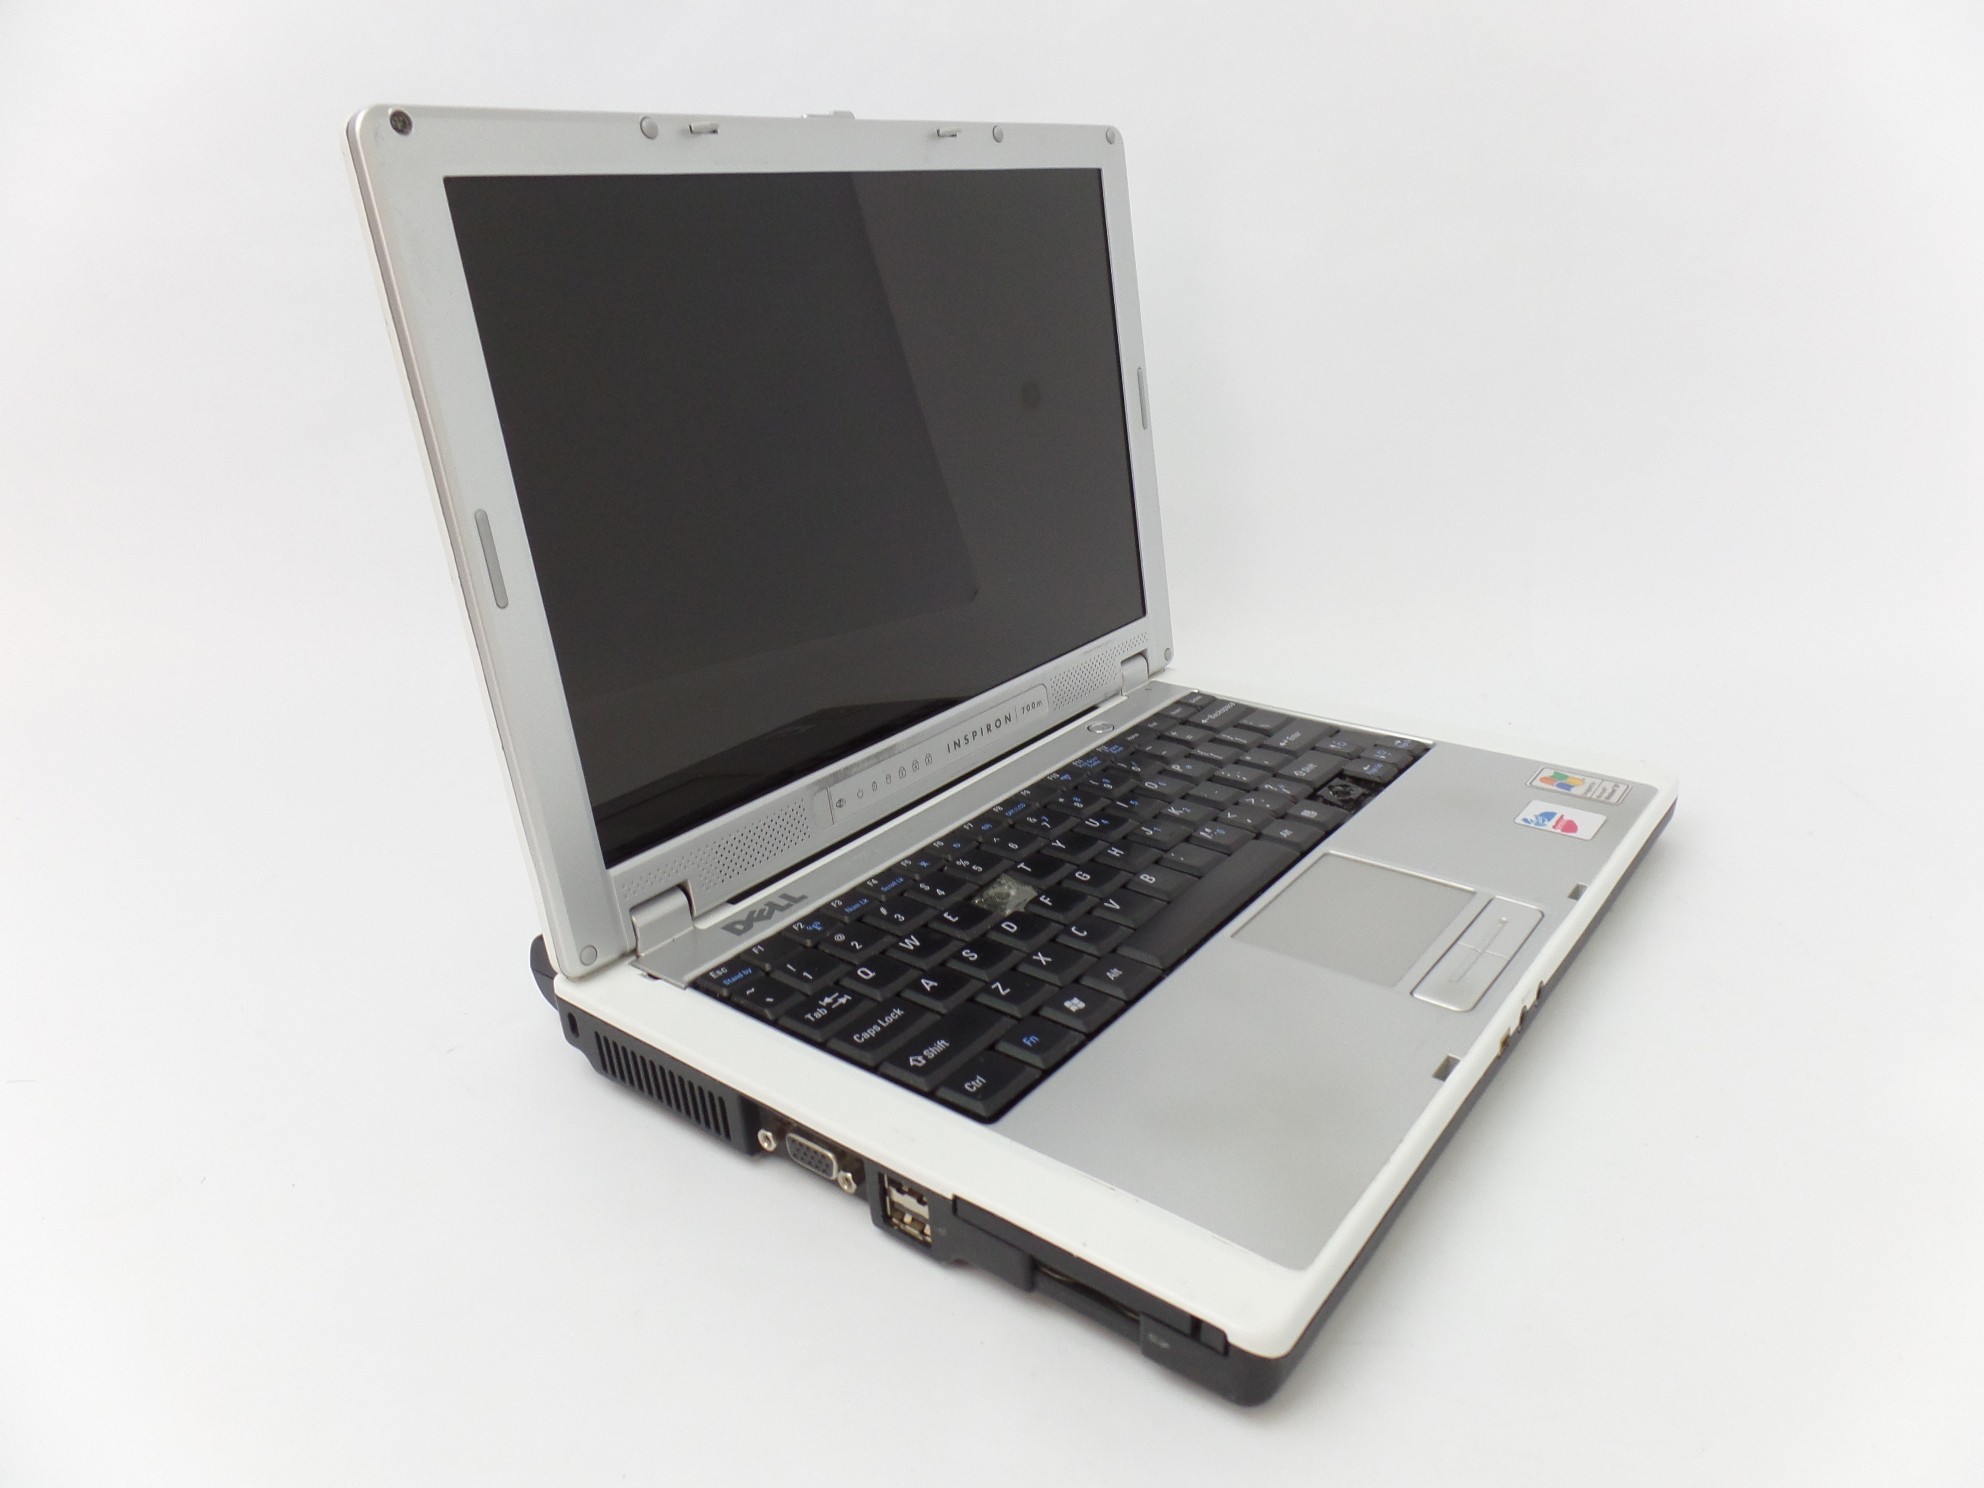 Dell Inspiron 700m 12" Pentium M 1.6GHz 756MB 40GB HDD Boots to BIOS